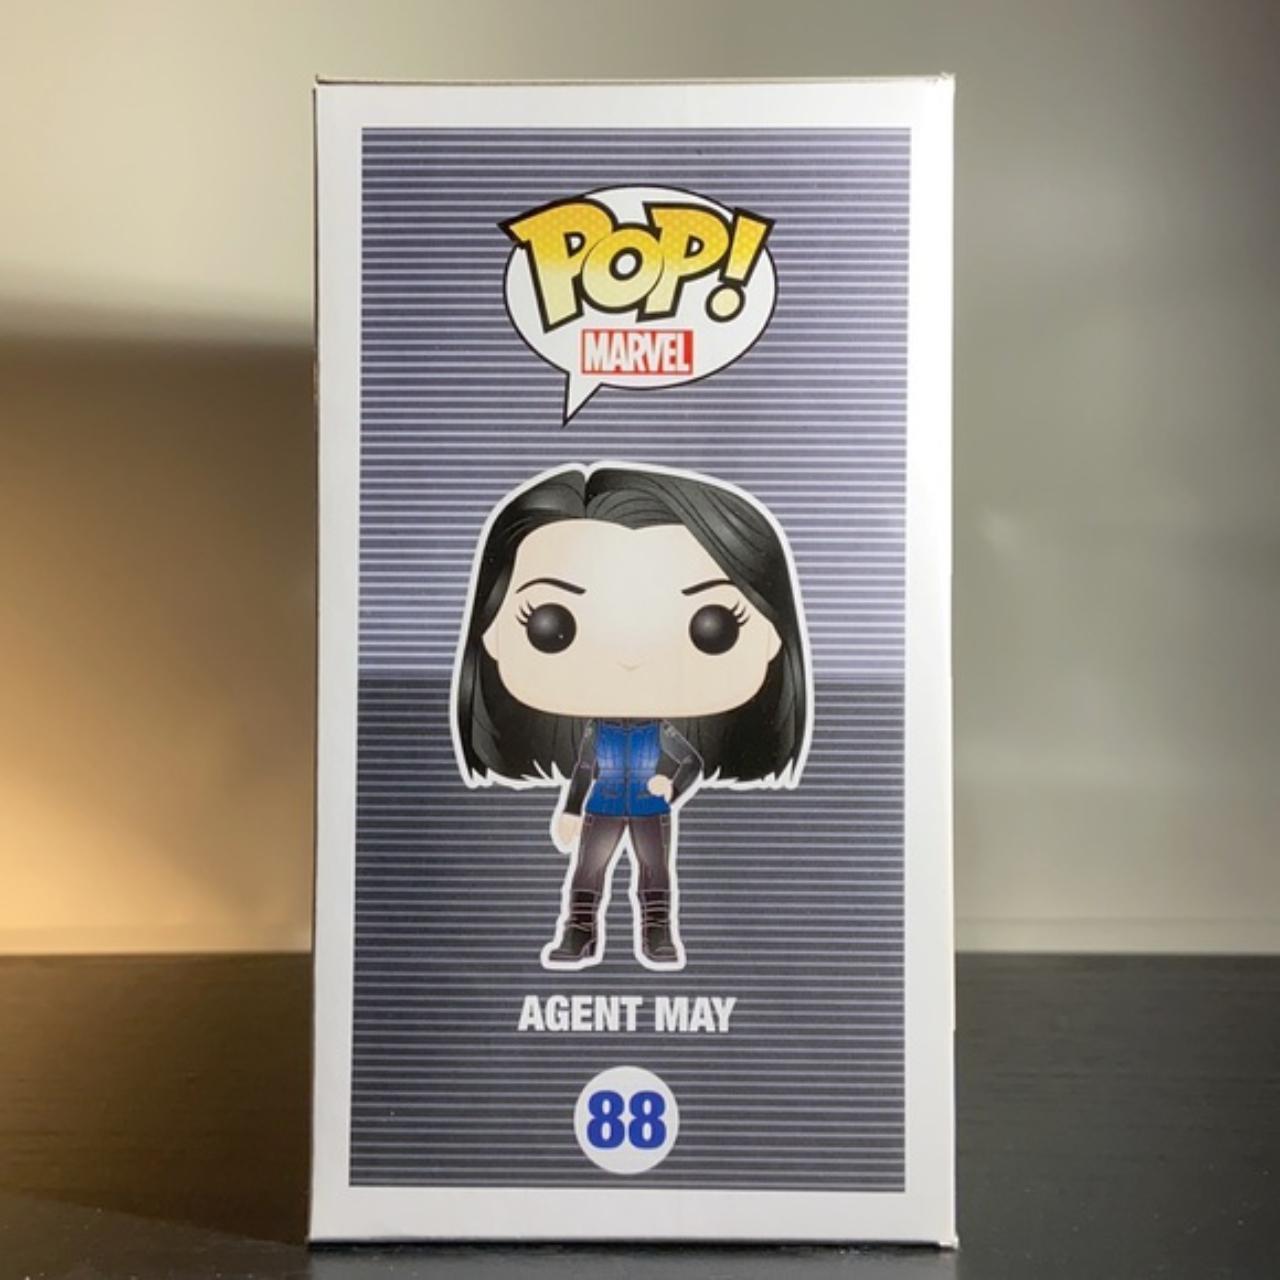 Product Image 4 - Agent May
Type: Vinyl Art Toys
Brand: